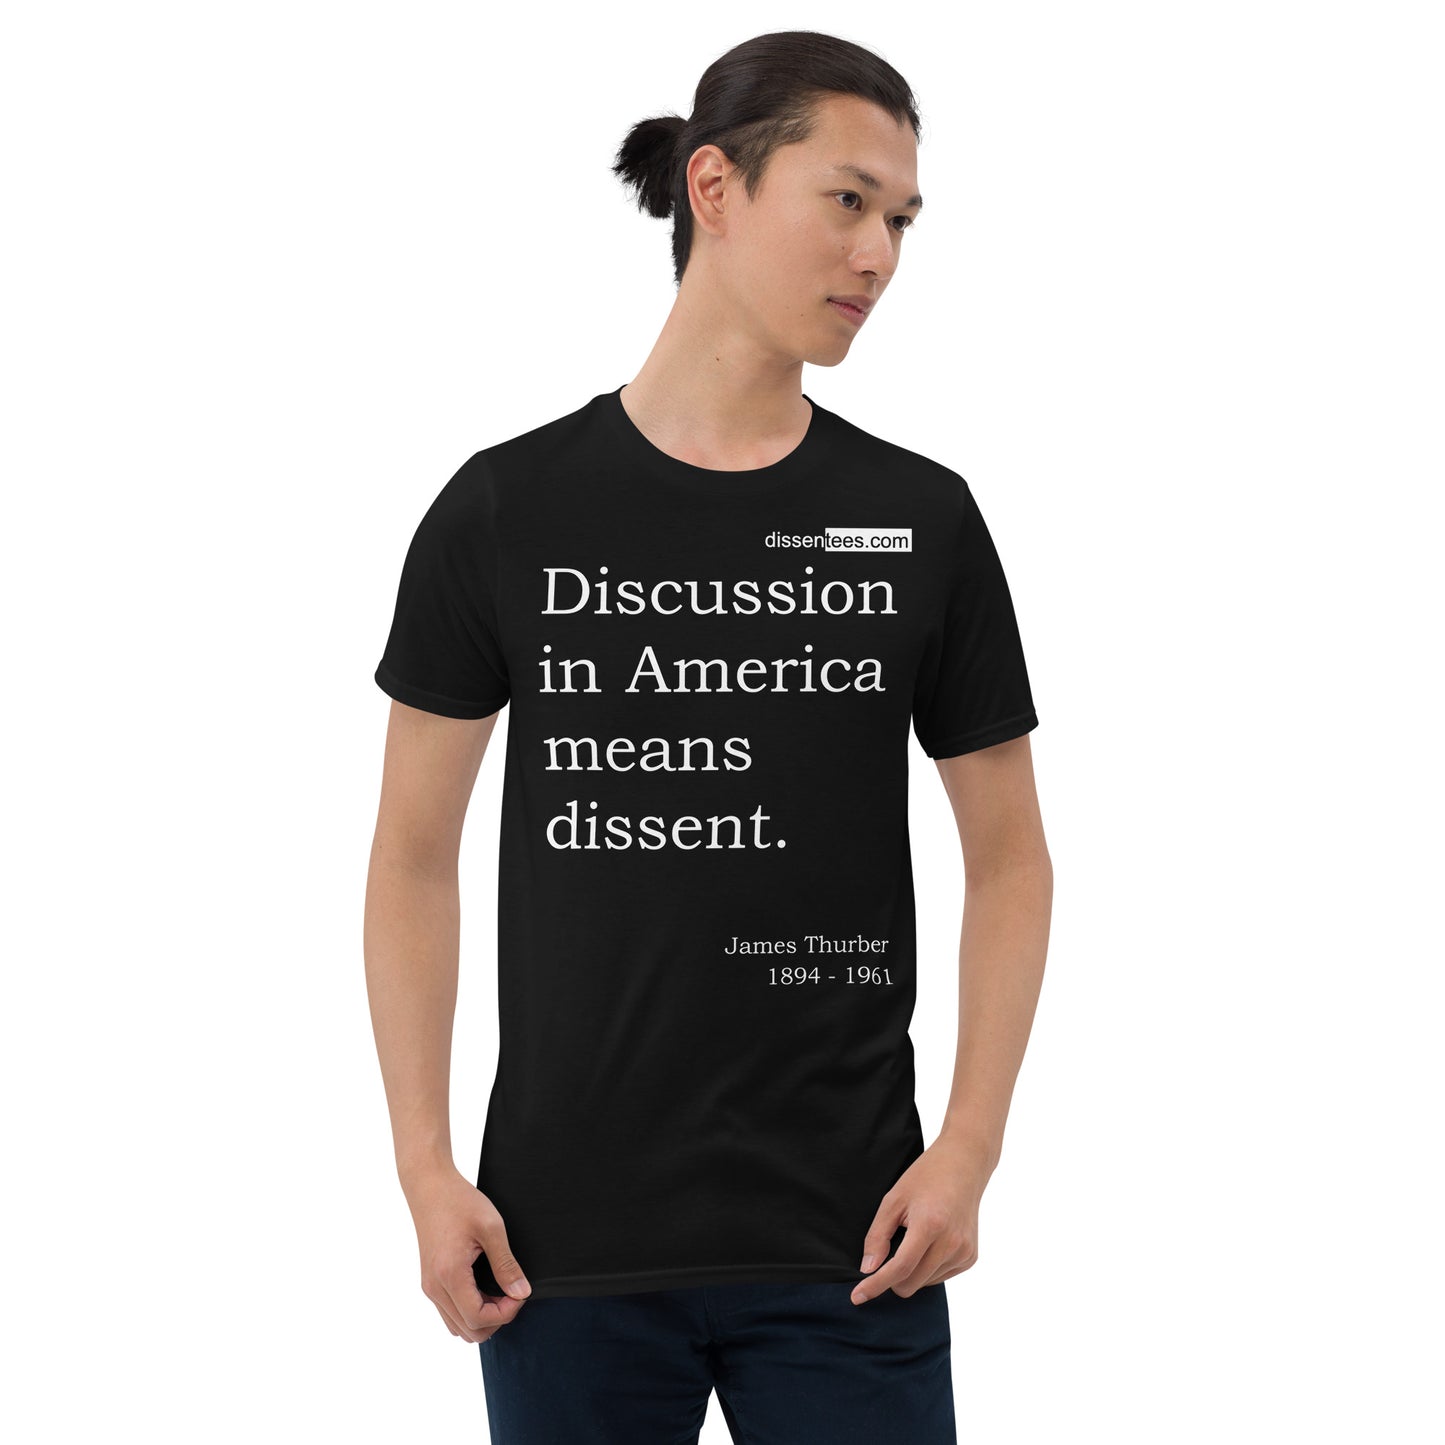 7. Discussion in America means dissent